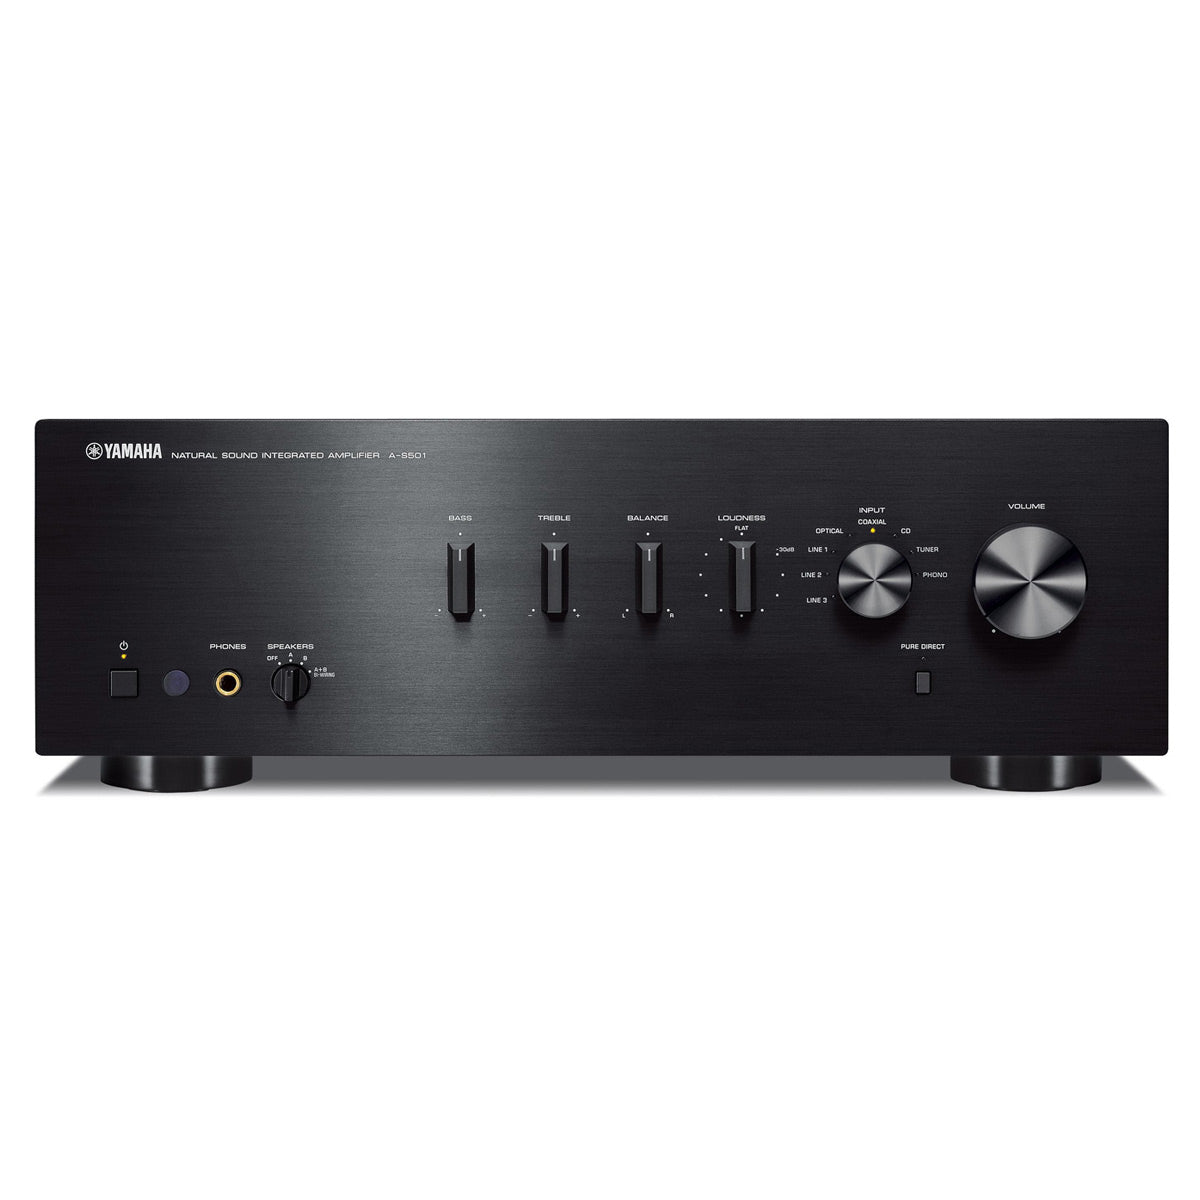 Yamaha A-S501 (Black) Stereo integrated amplifier with built-in